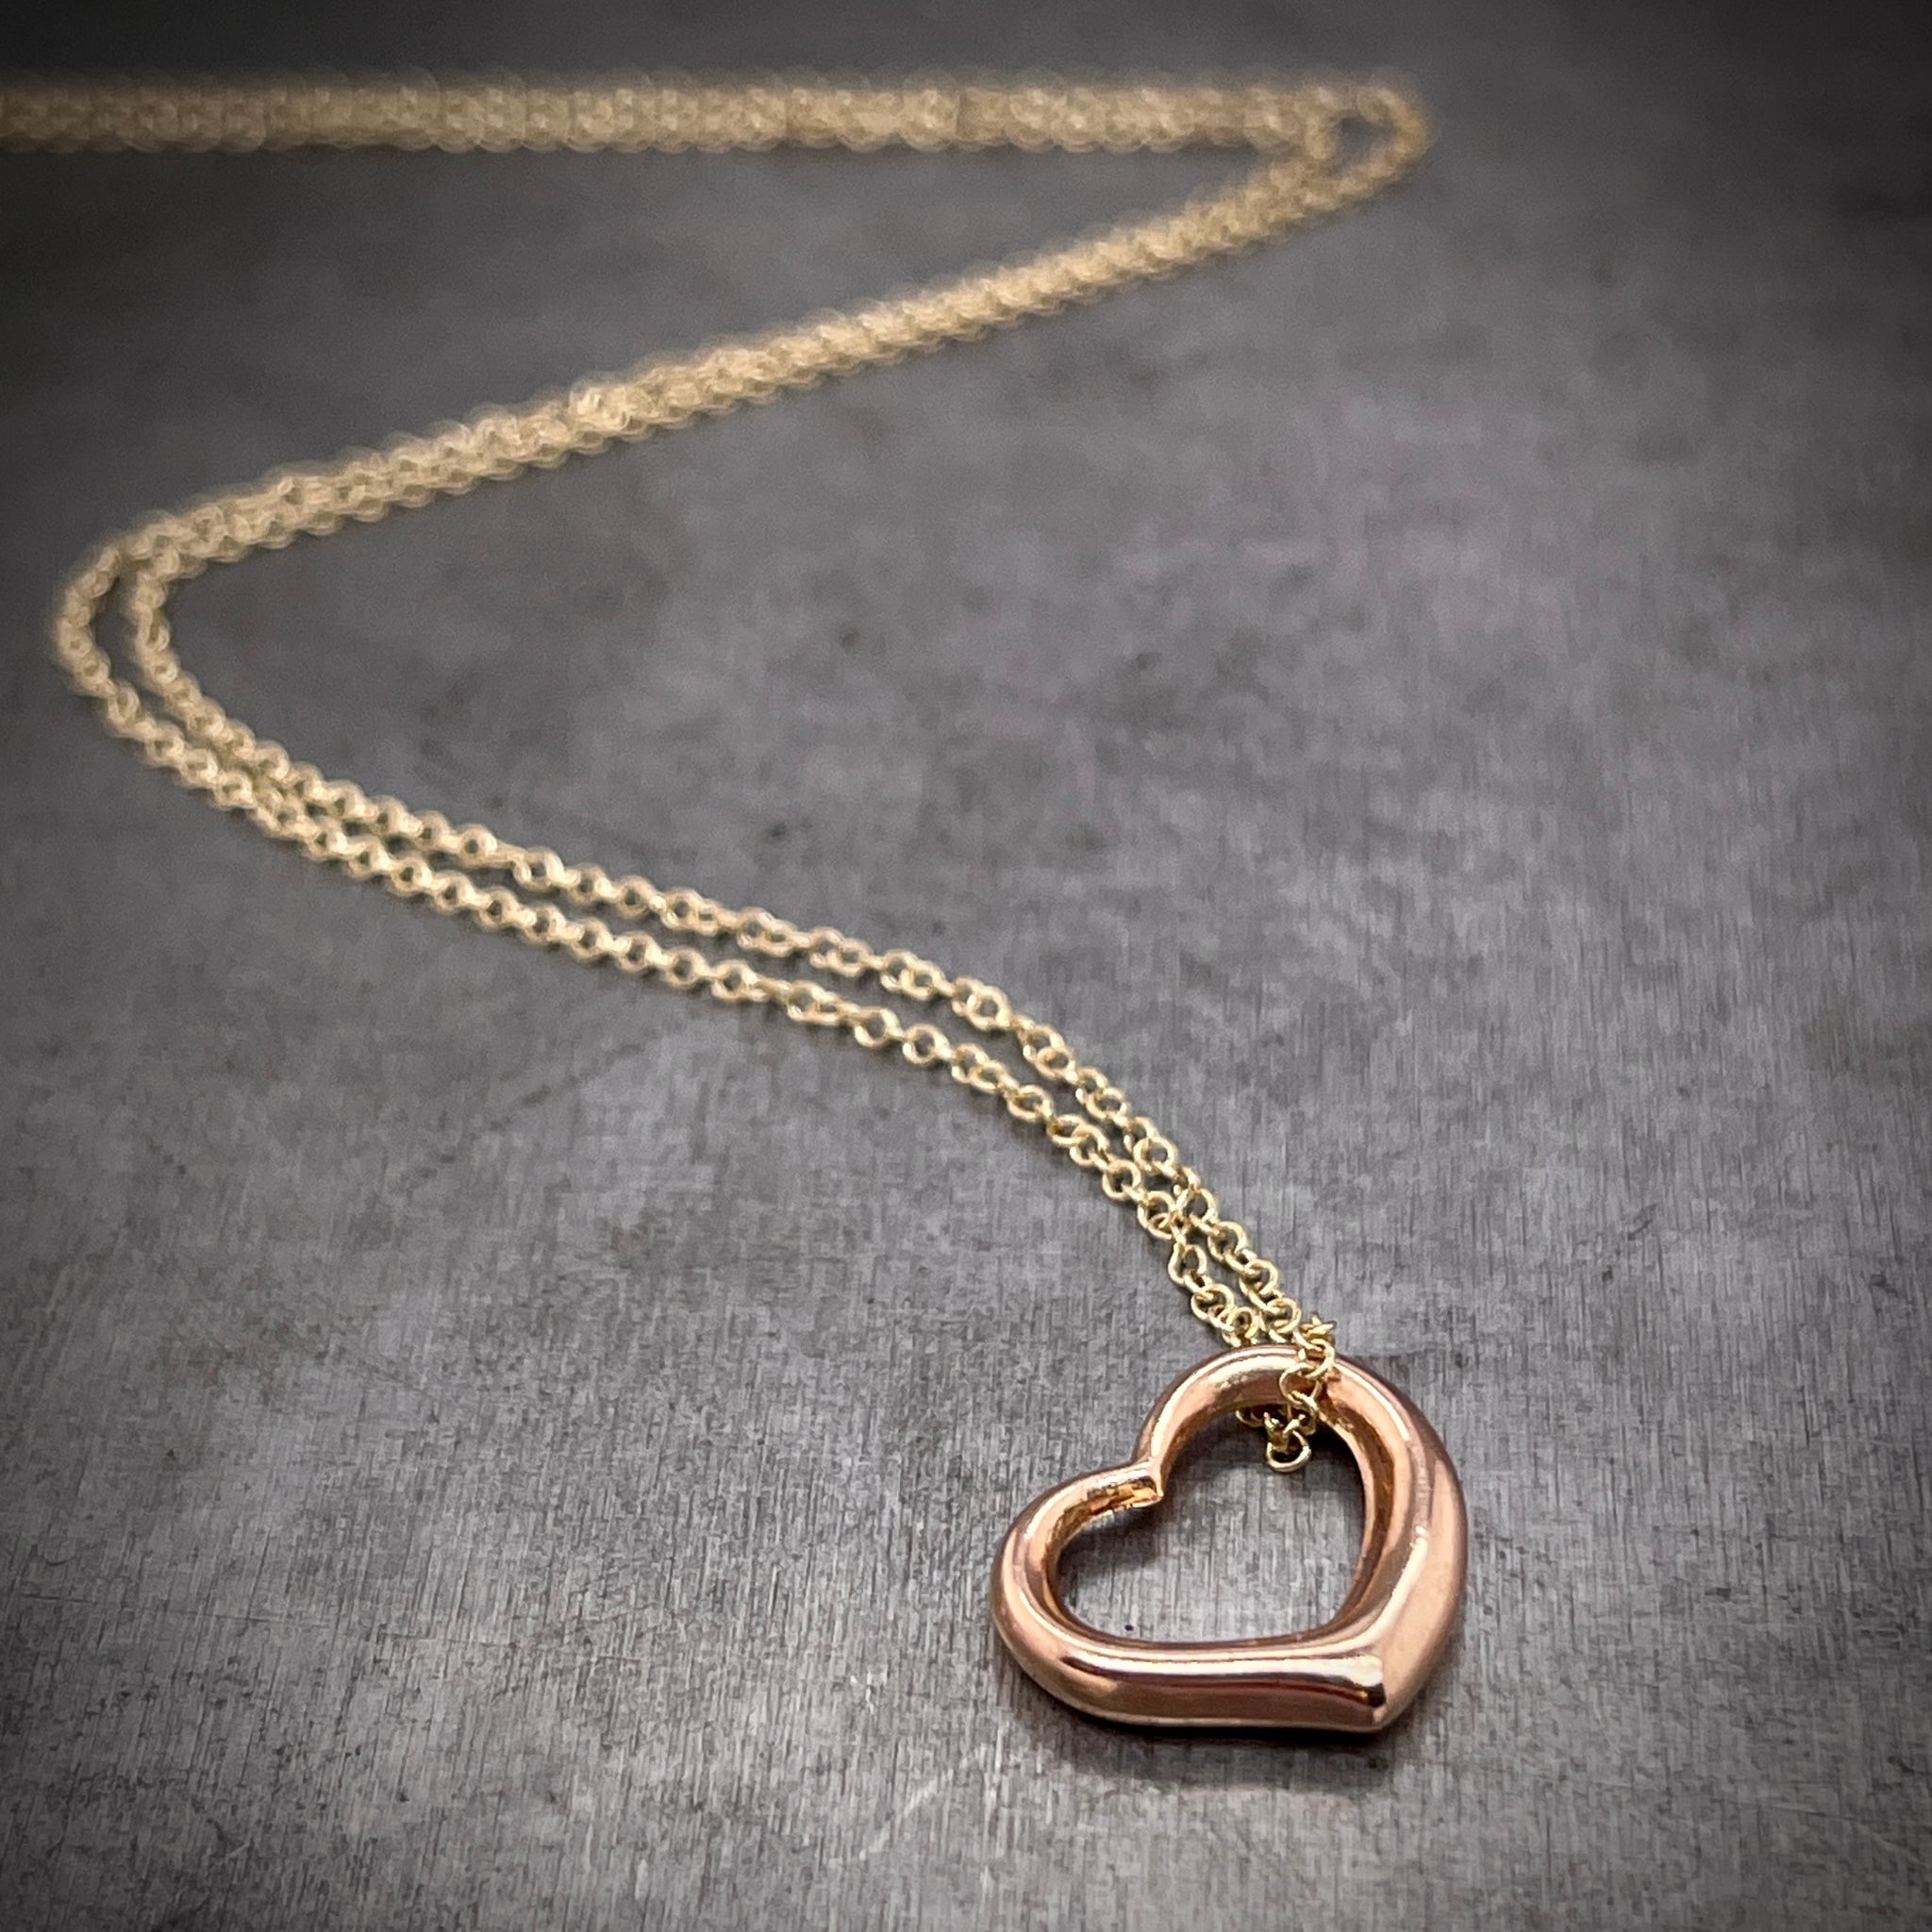 Rose gold heart and yellow chain featured laying down with chain twisting in background.